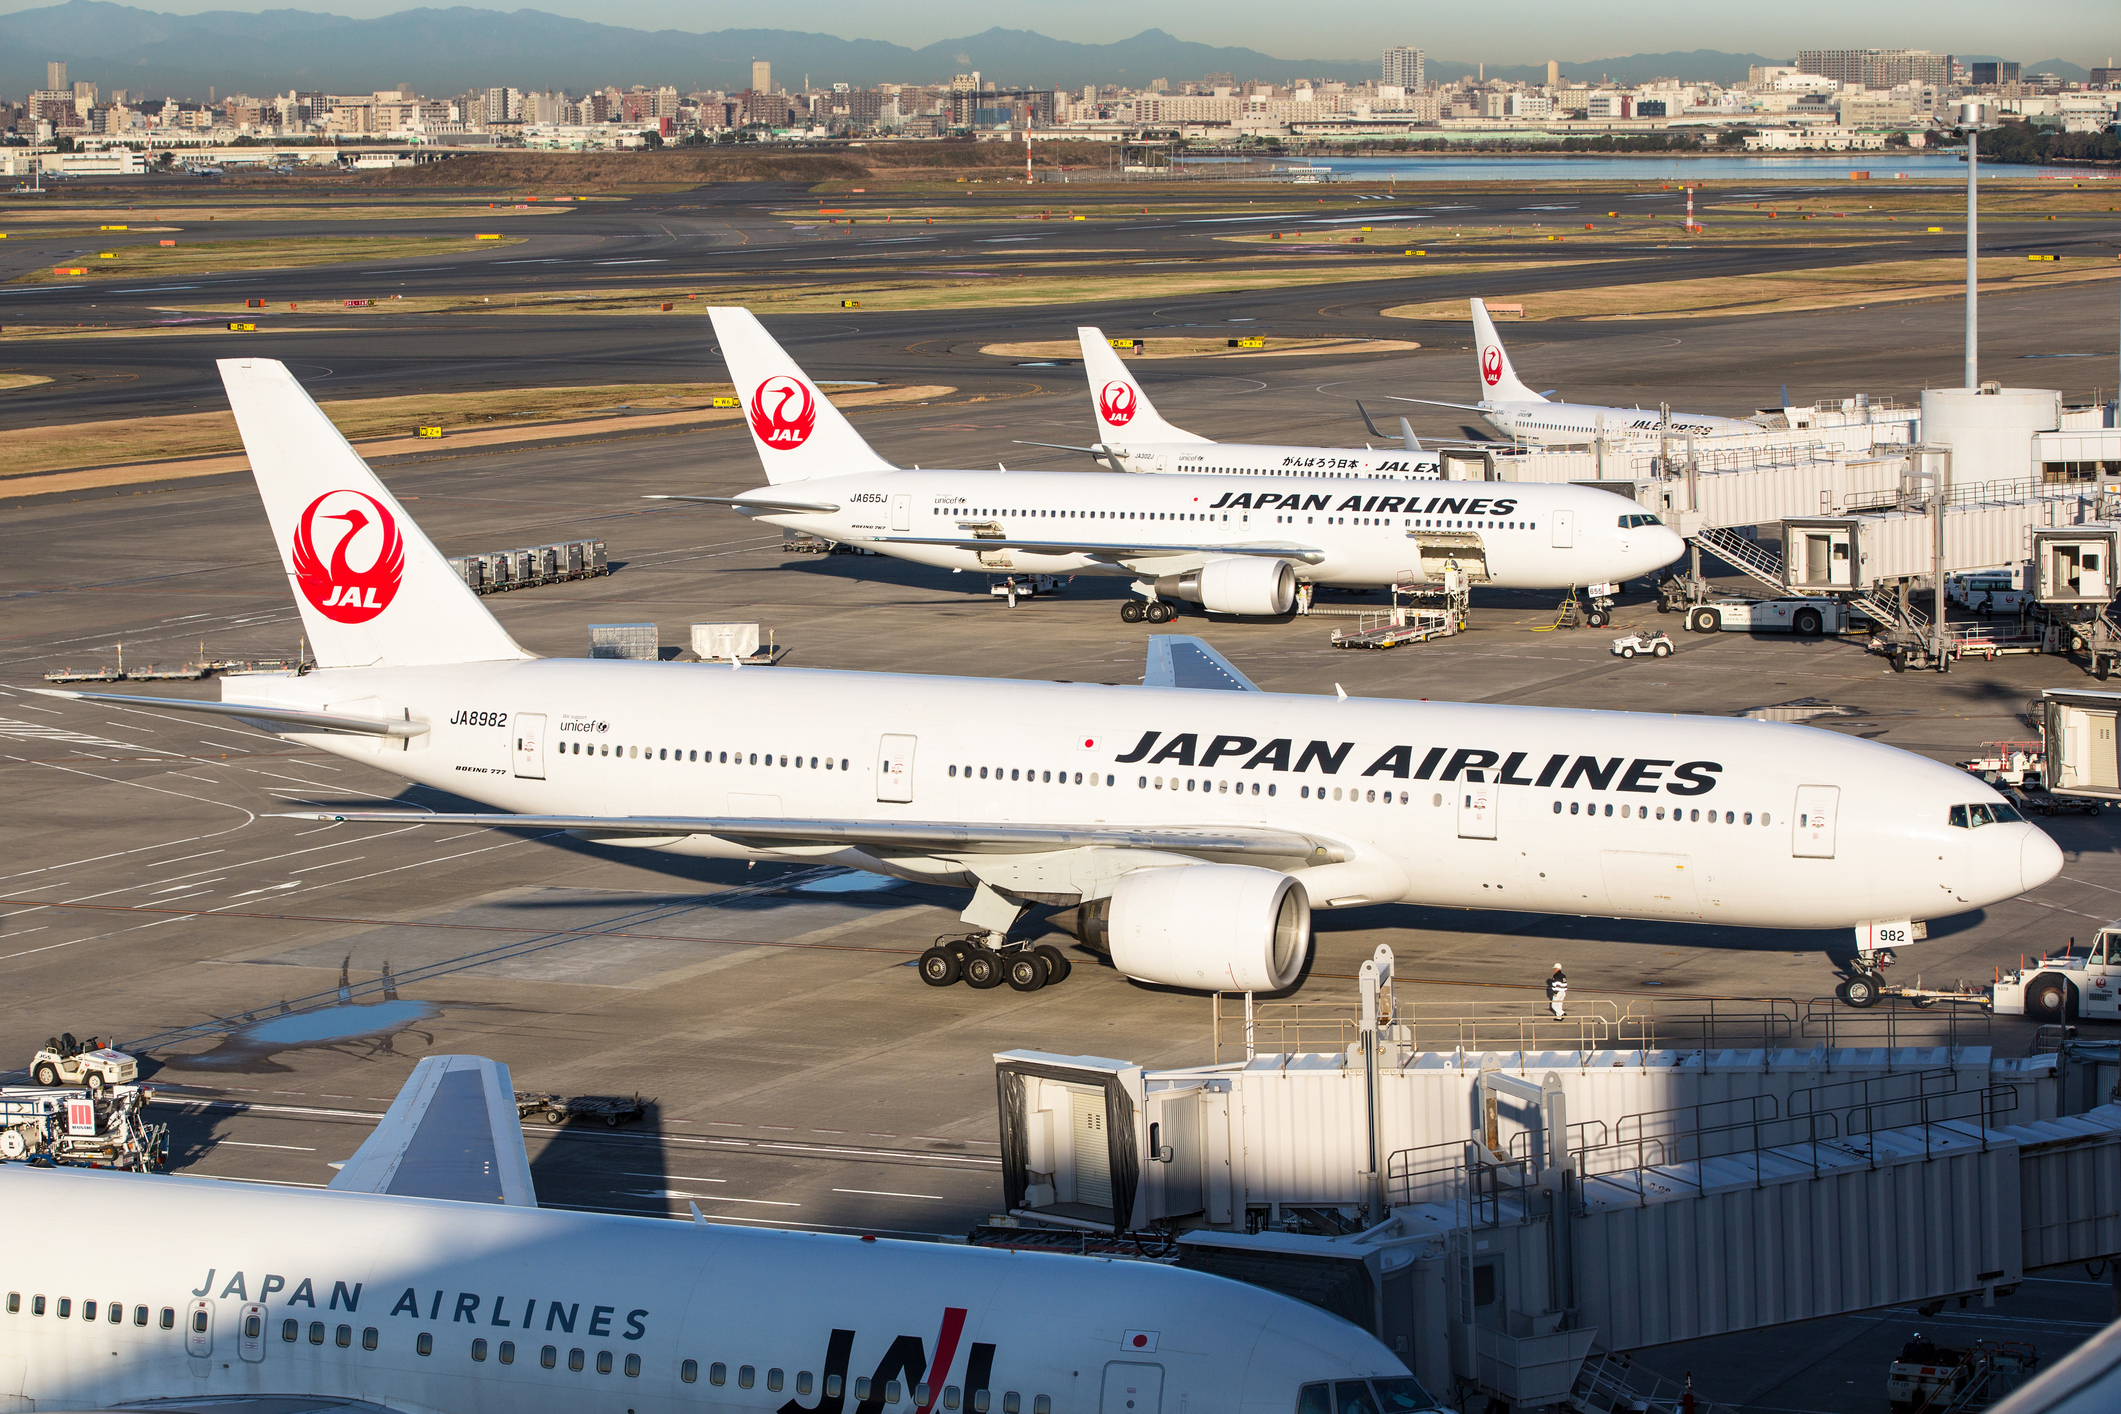 Japan Airlines giving away 50,000 round-trip tickets to Tokyo Olympics attendees - to try to get them out of Tokyo